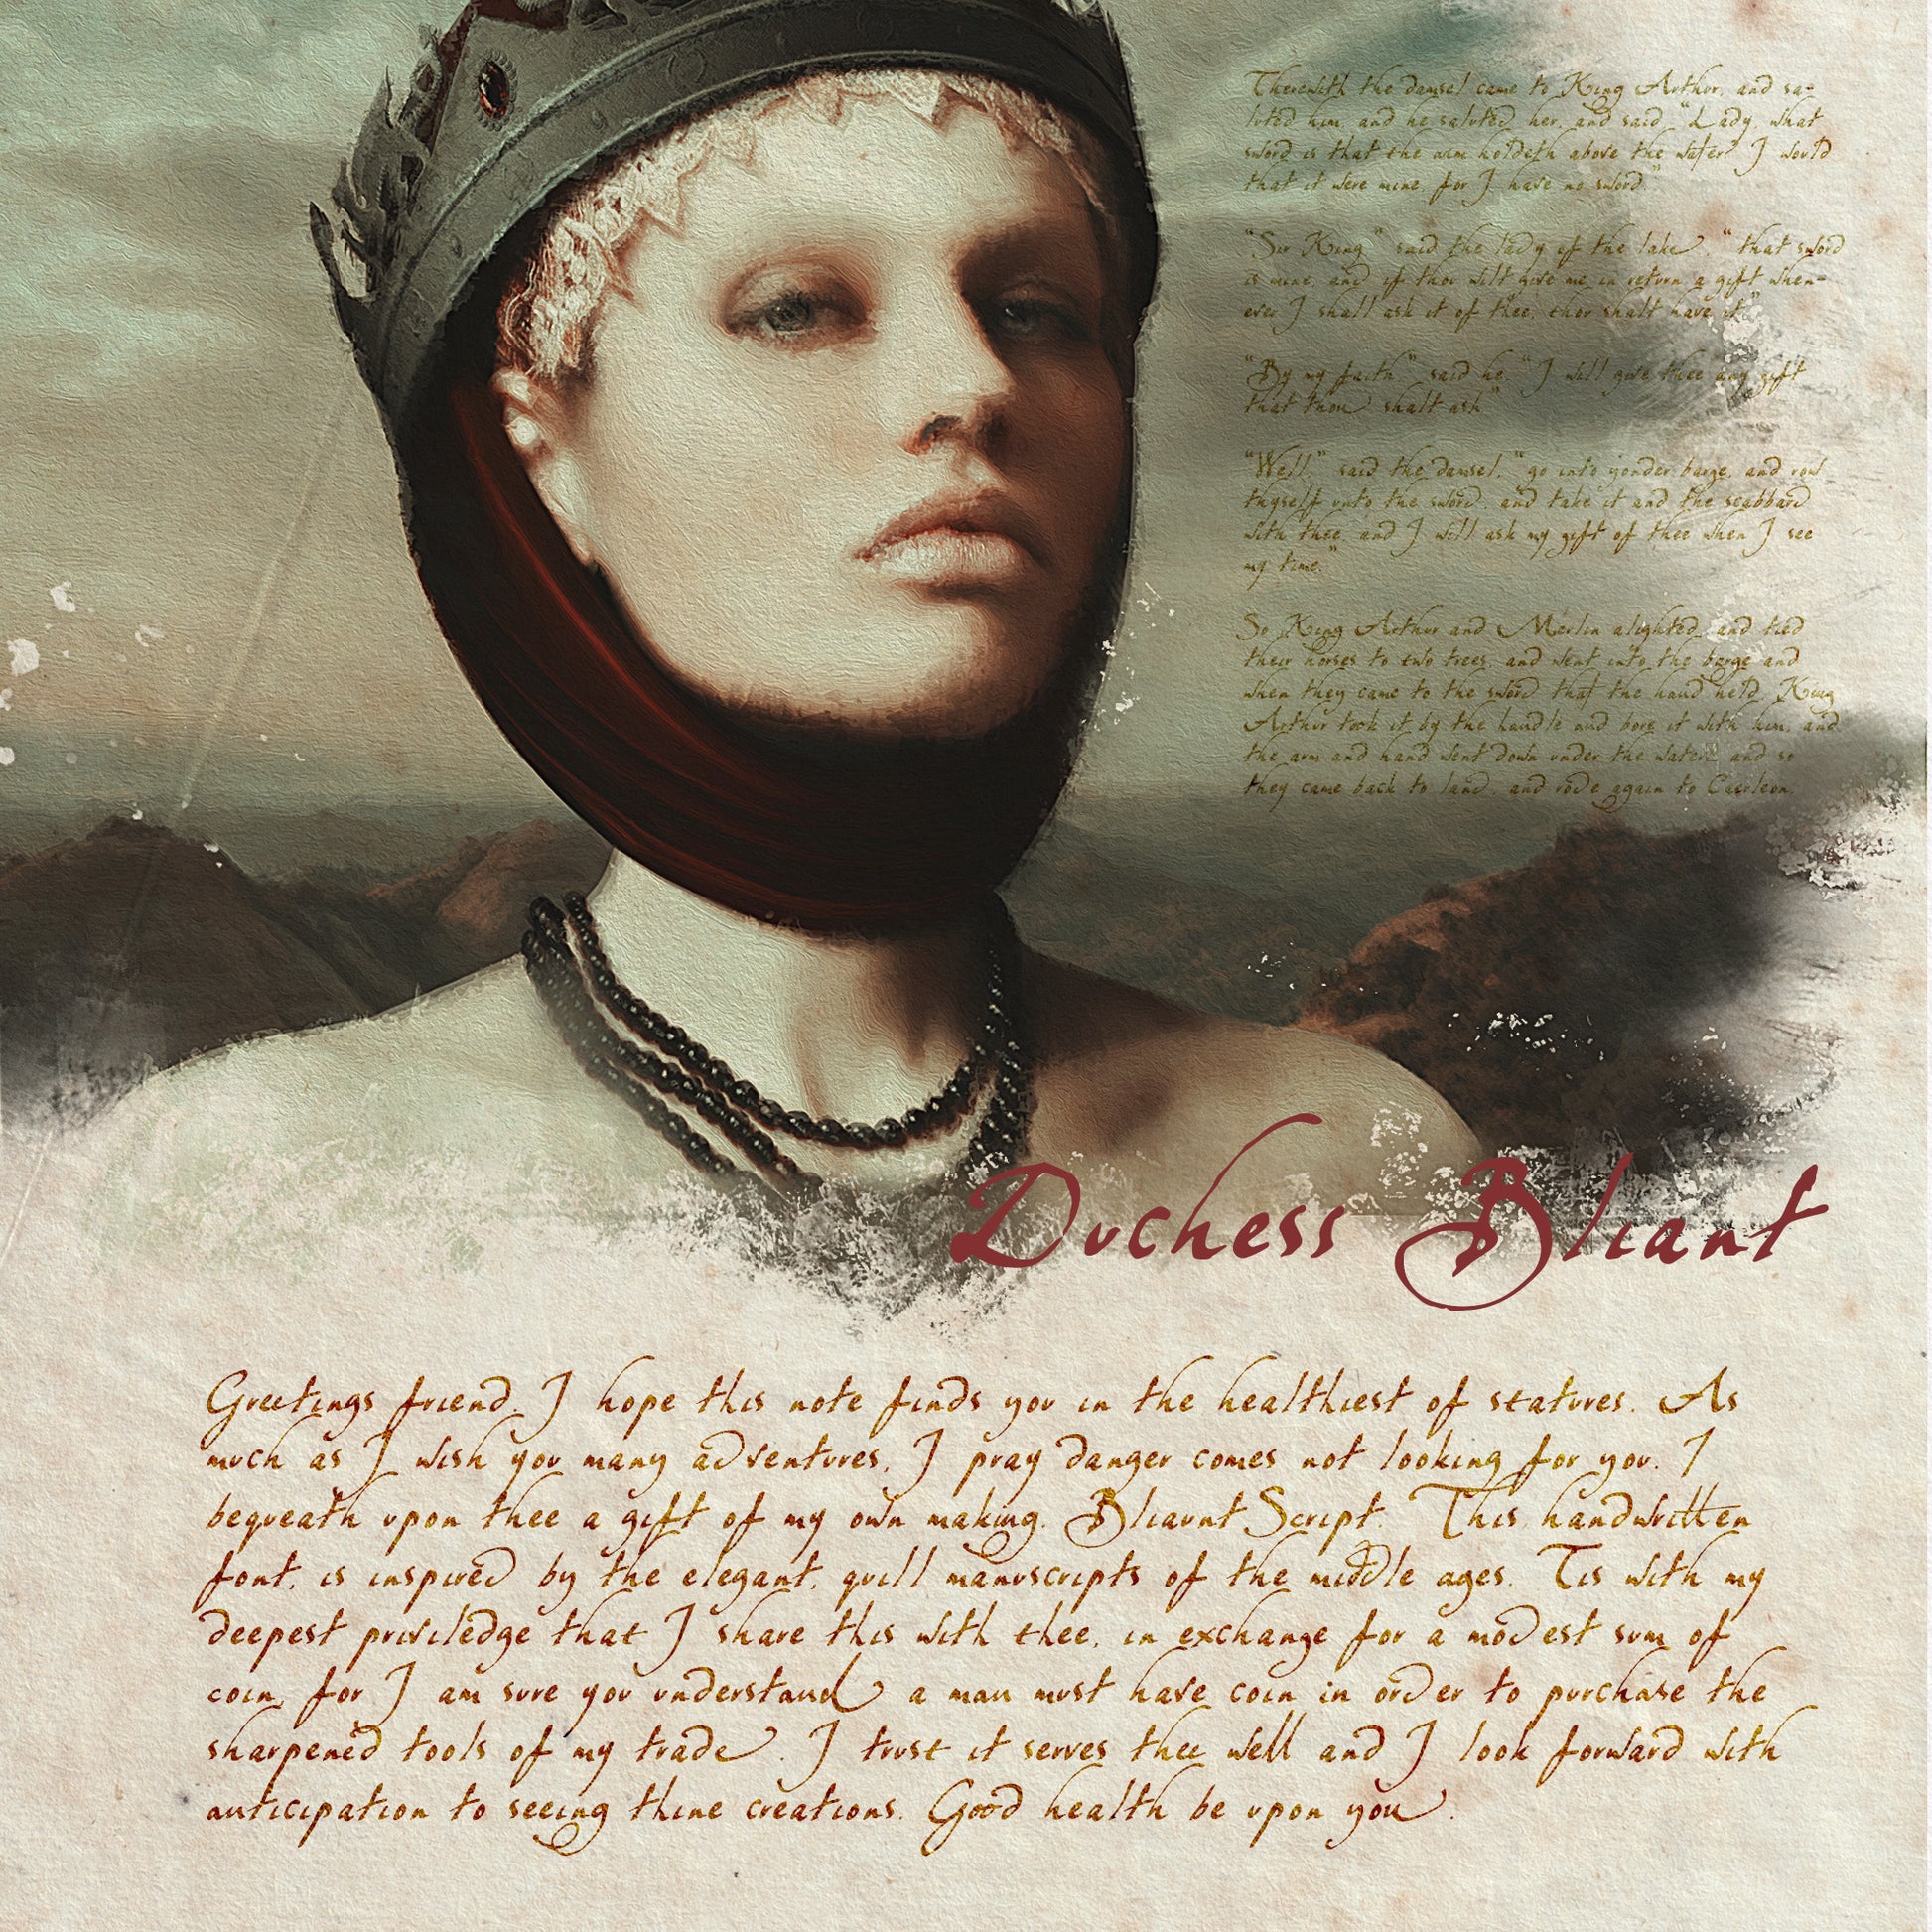 Medieval looking painting of a woman with bliaunt script text overlaid on top